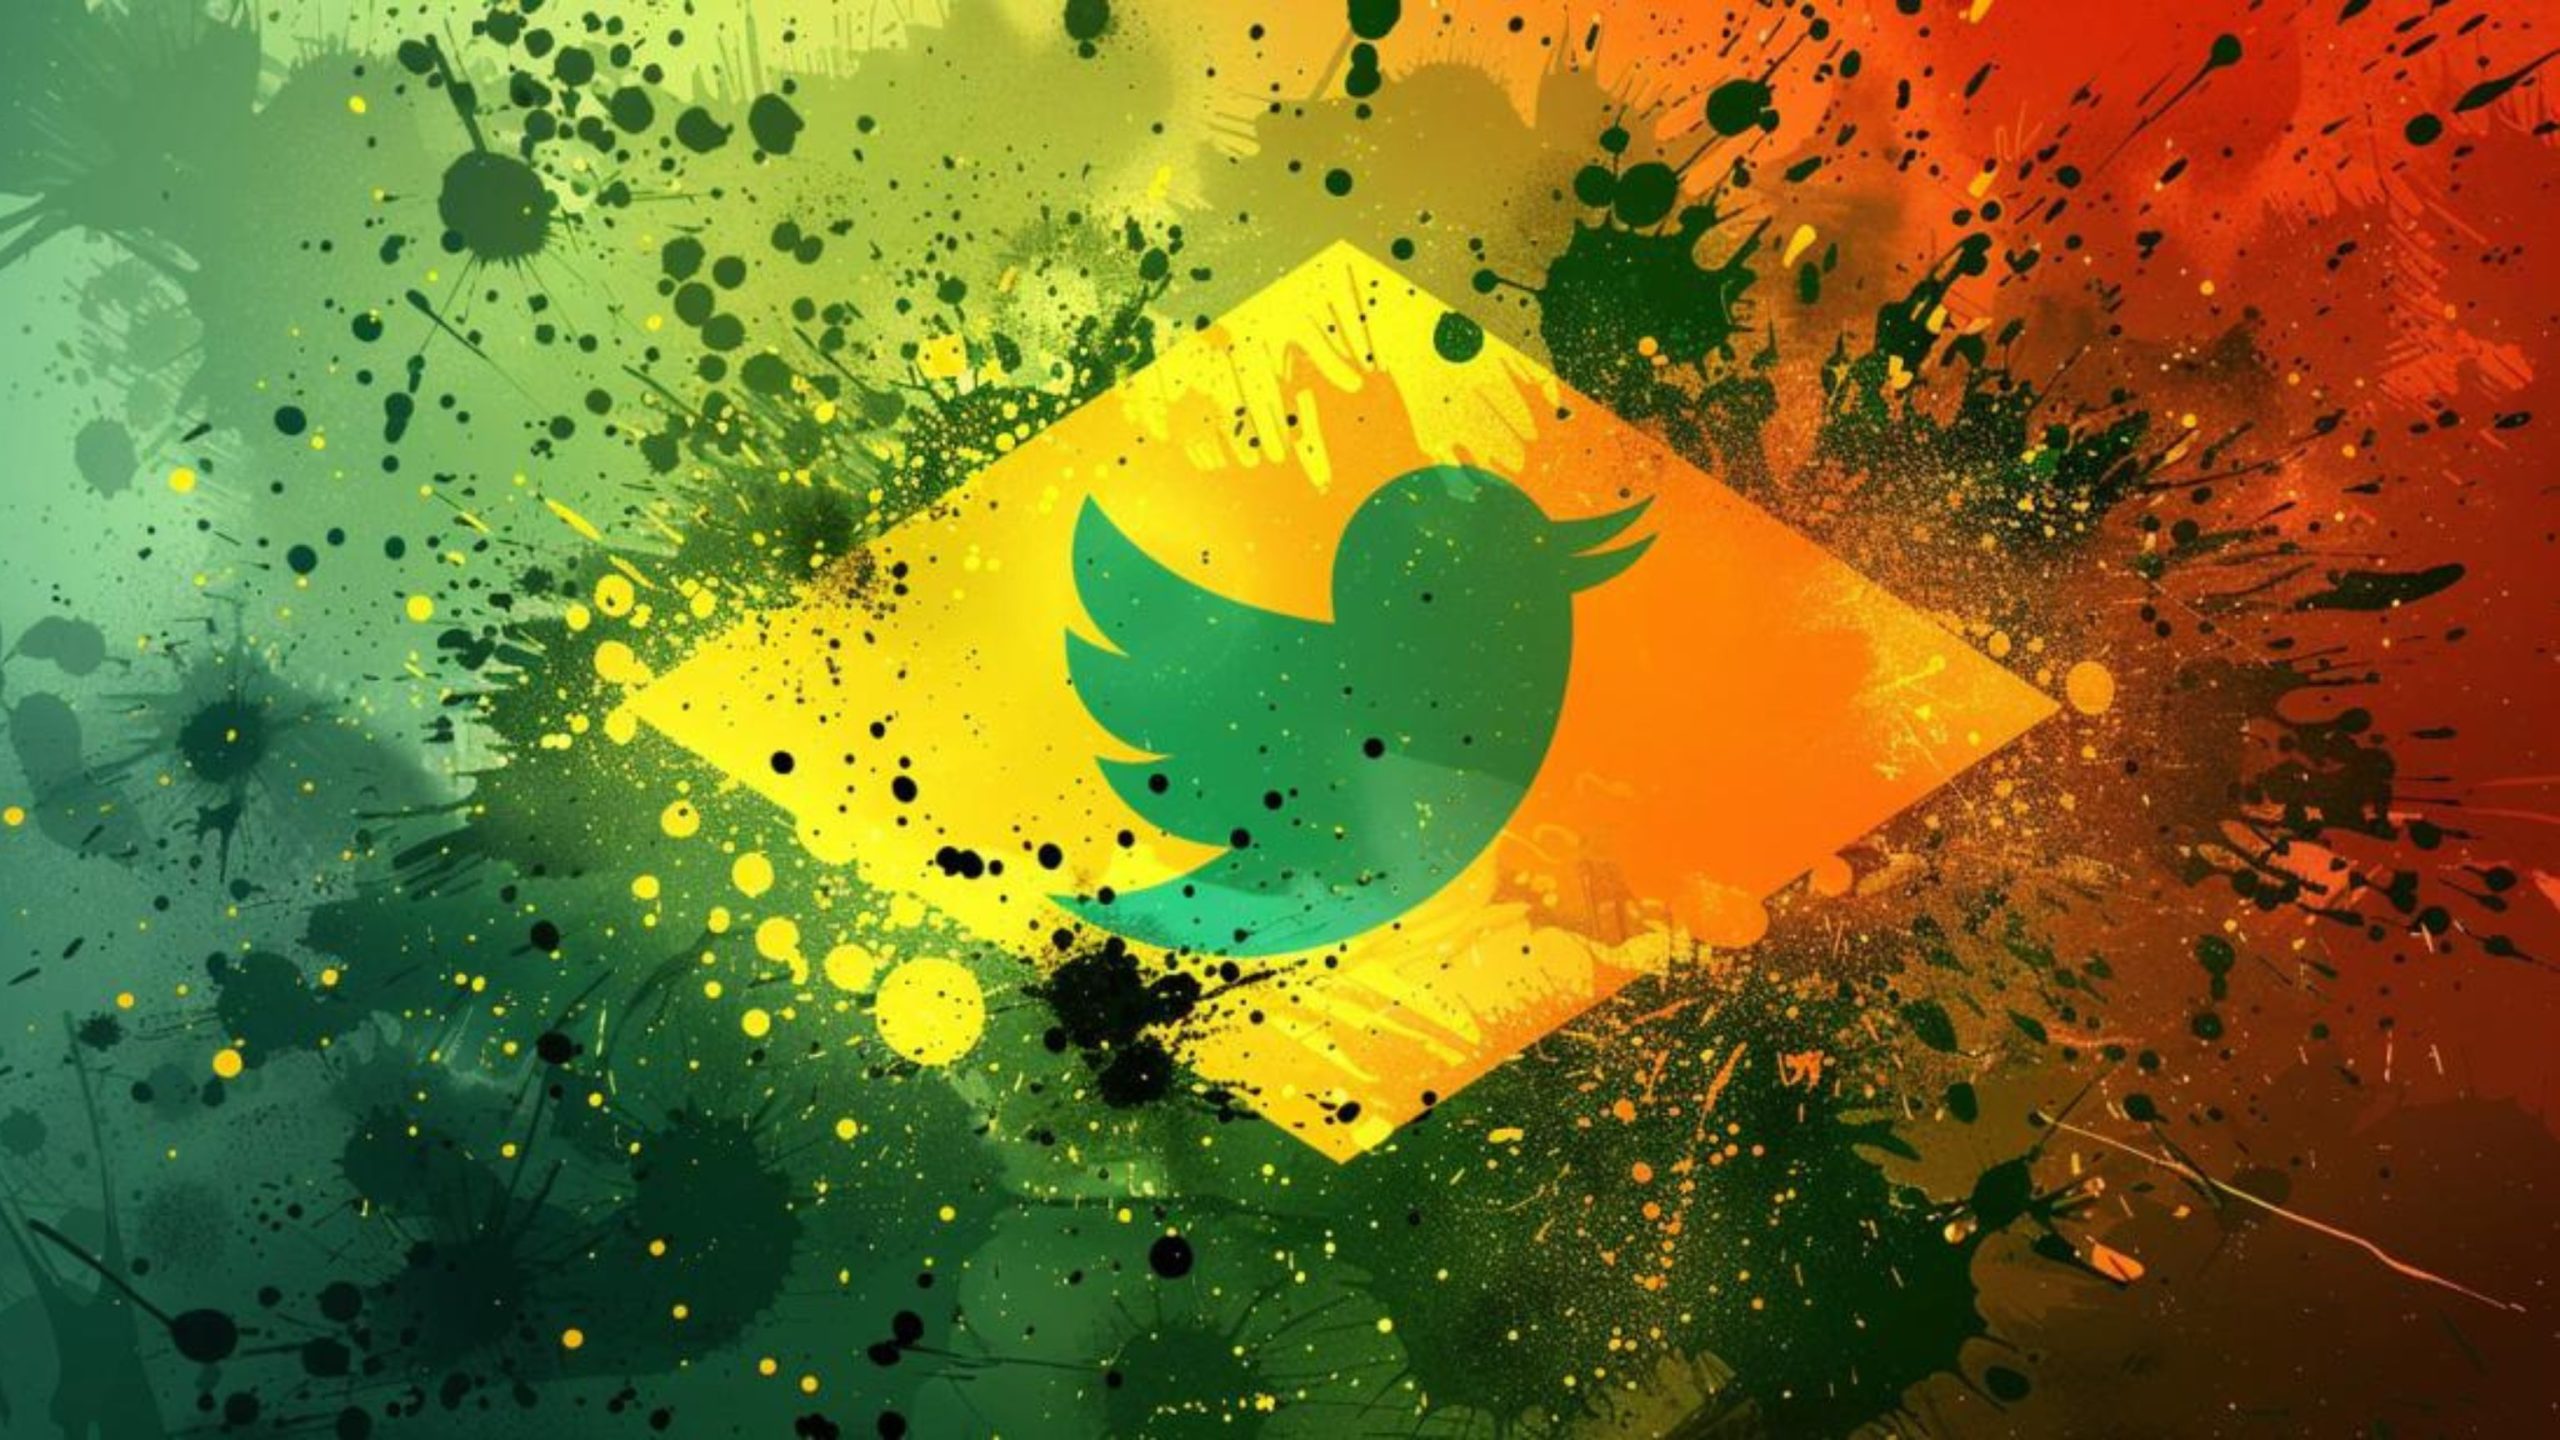 Brazilian Censorship Scandal: Twitter Files Shows How Government and Big Tech Silence Dissent